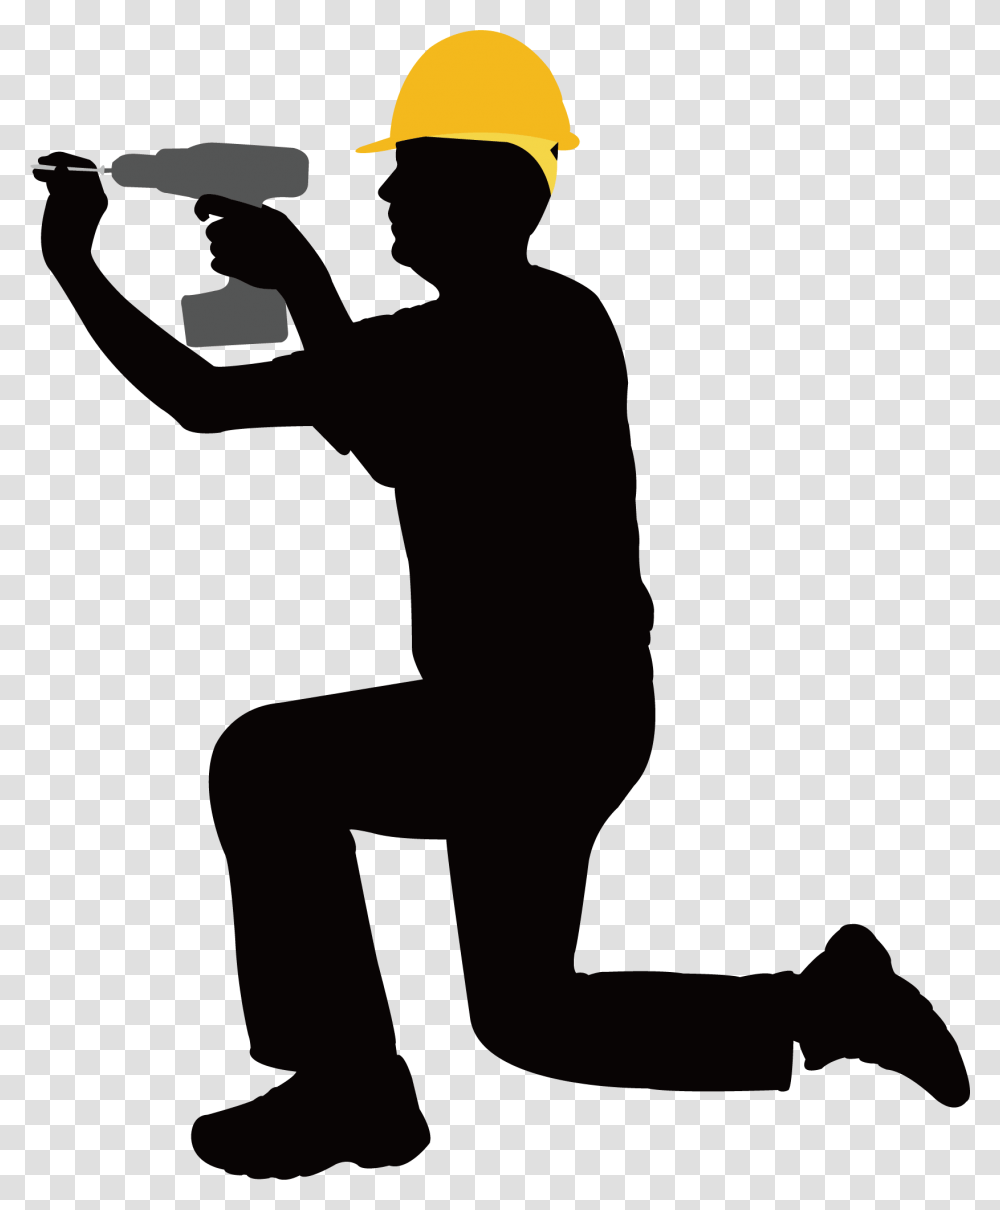 Construction Worker Silhouette Silhouette Construction Worker Clipart, Person, Human, Kneeling, Hardhat Transparent Png